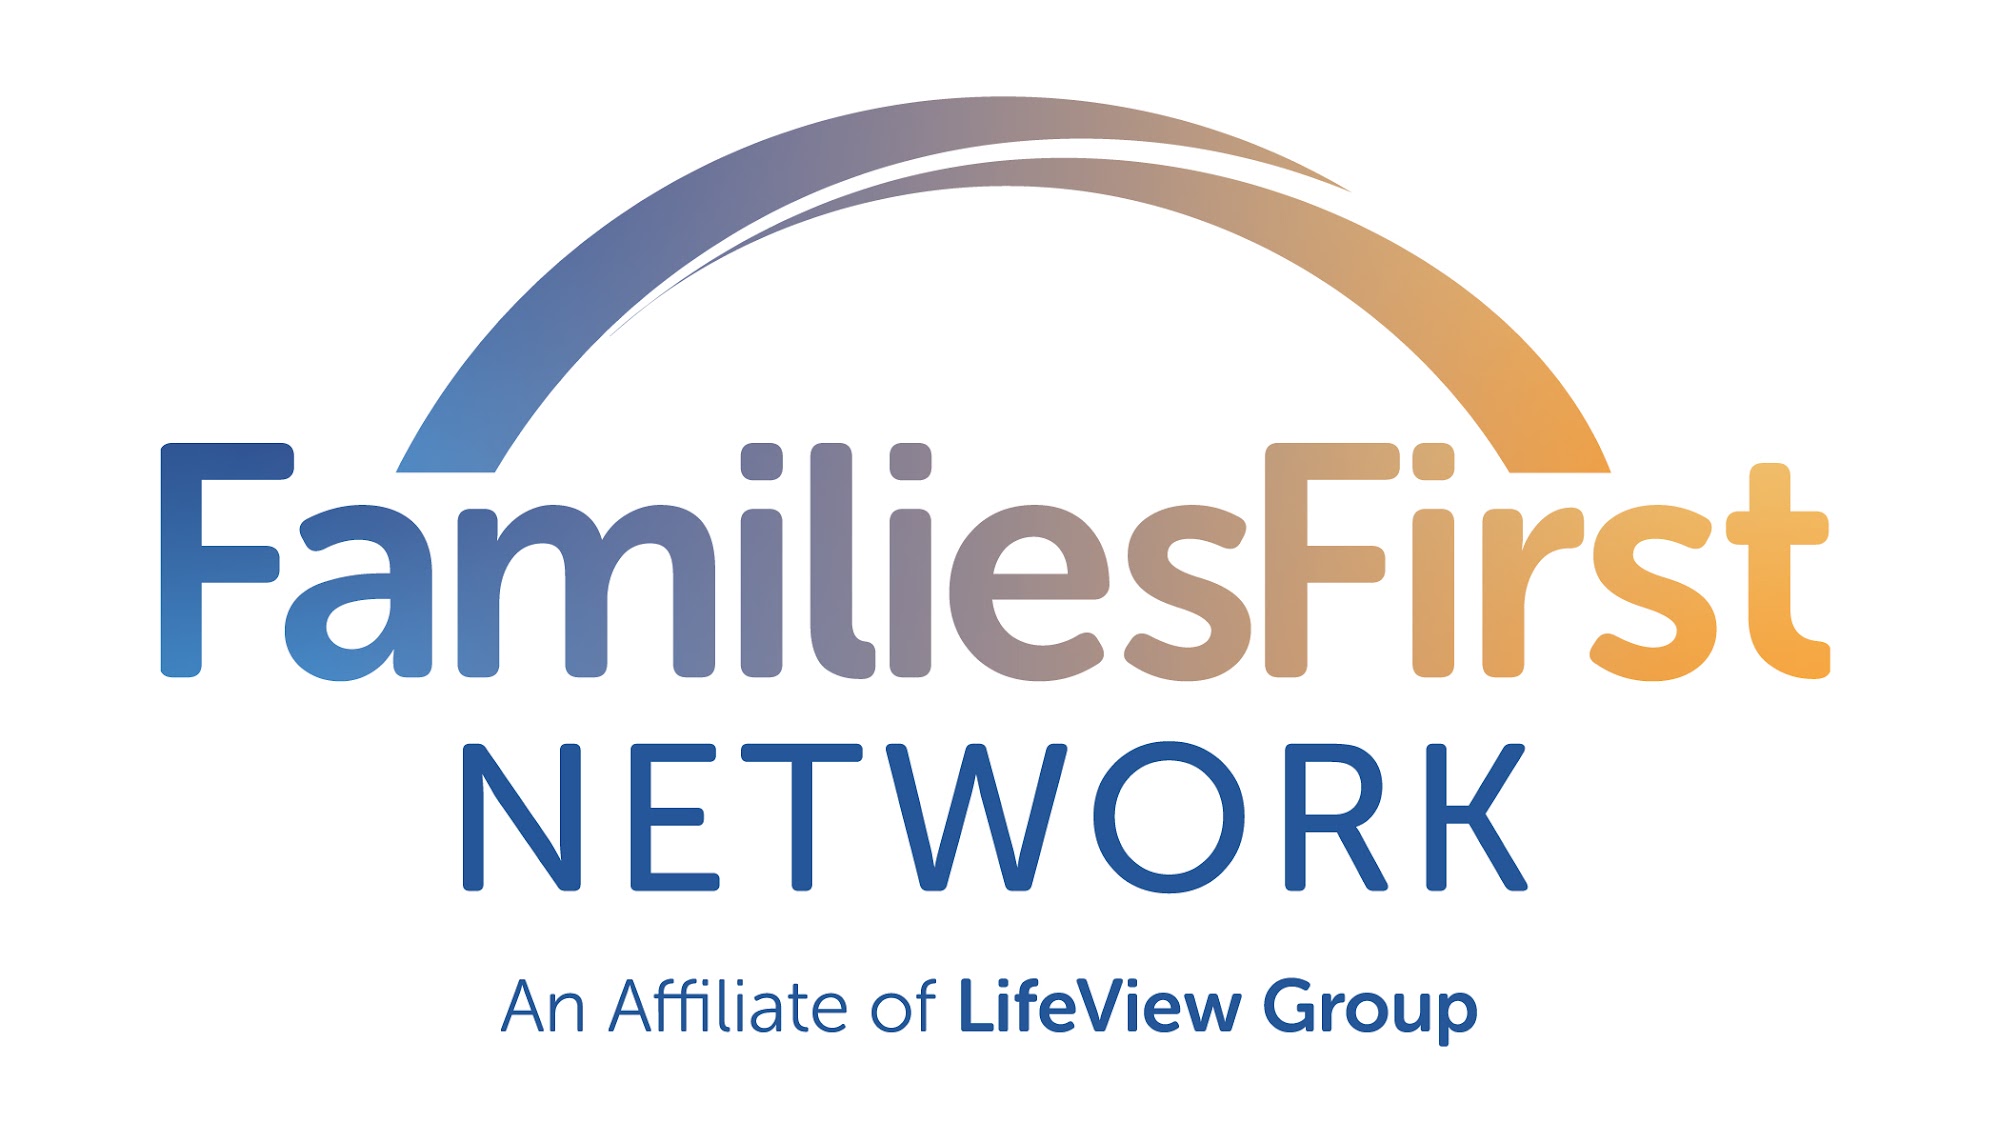 FamiliesFirst Network